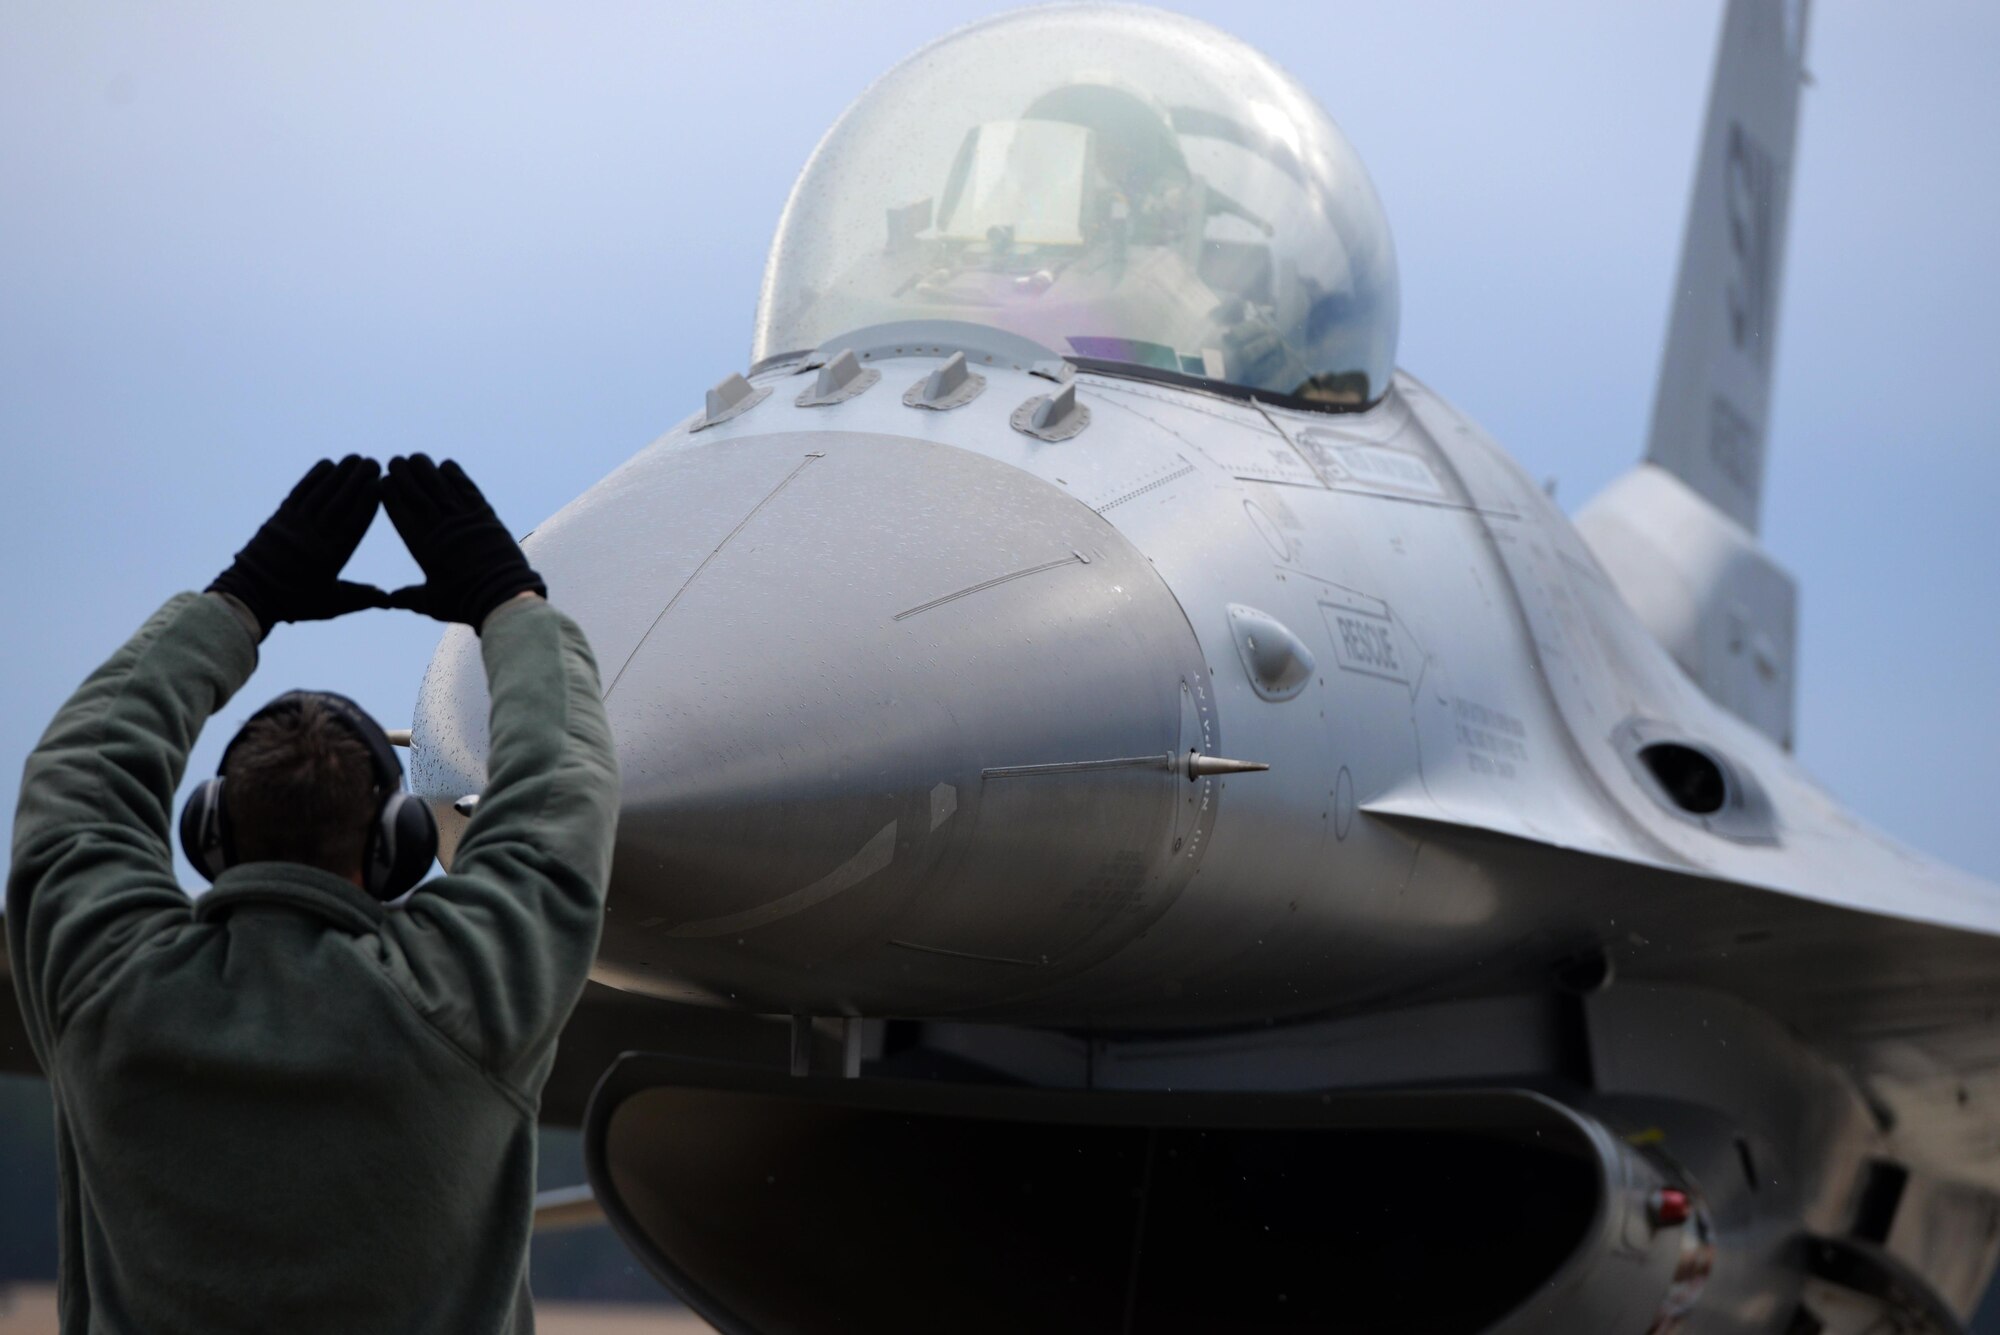 An Airman marshals an F-16 Fighting Falcon to a stop Feb. 5, 2015, at Shaw Air Force Base, S.C. The mission of the 20th Fighter Wing is to provide combat ready airpower and Airmen, to meet any challenge, anytime, anywhere. The Airman is assigned to the 20th Aircraft Maintenance Squadron. (U.S. Air Force photo/Airman 1st Class Jonathan Bass)